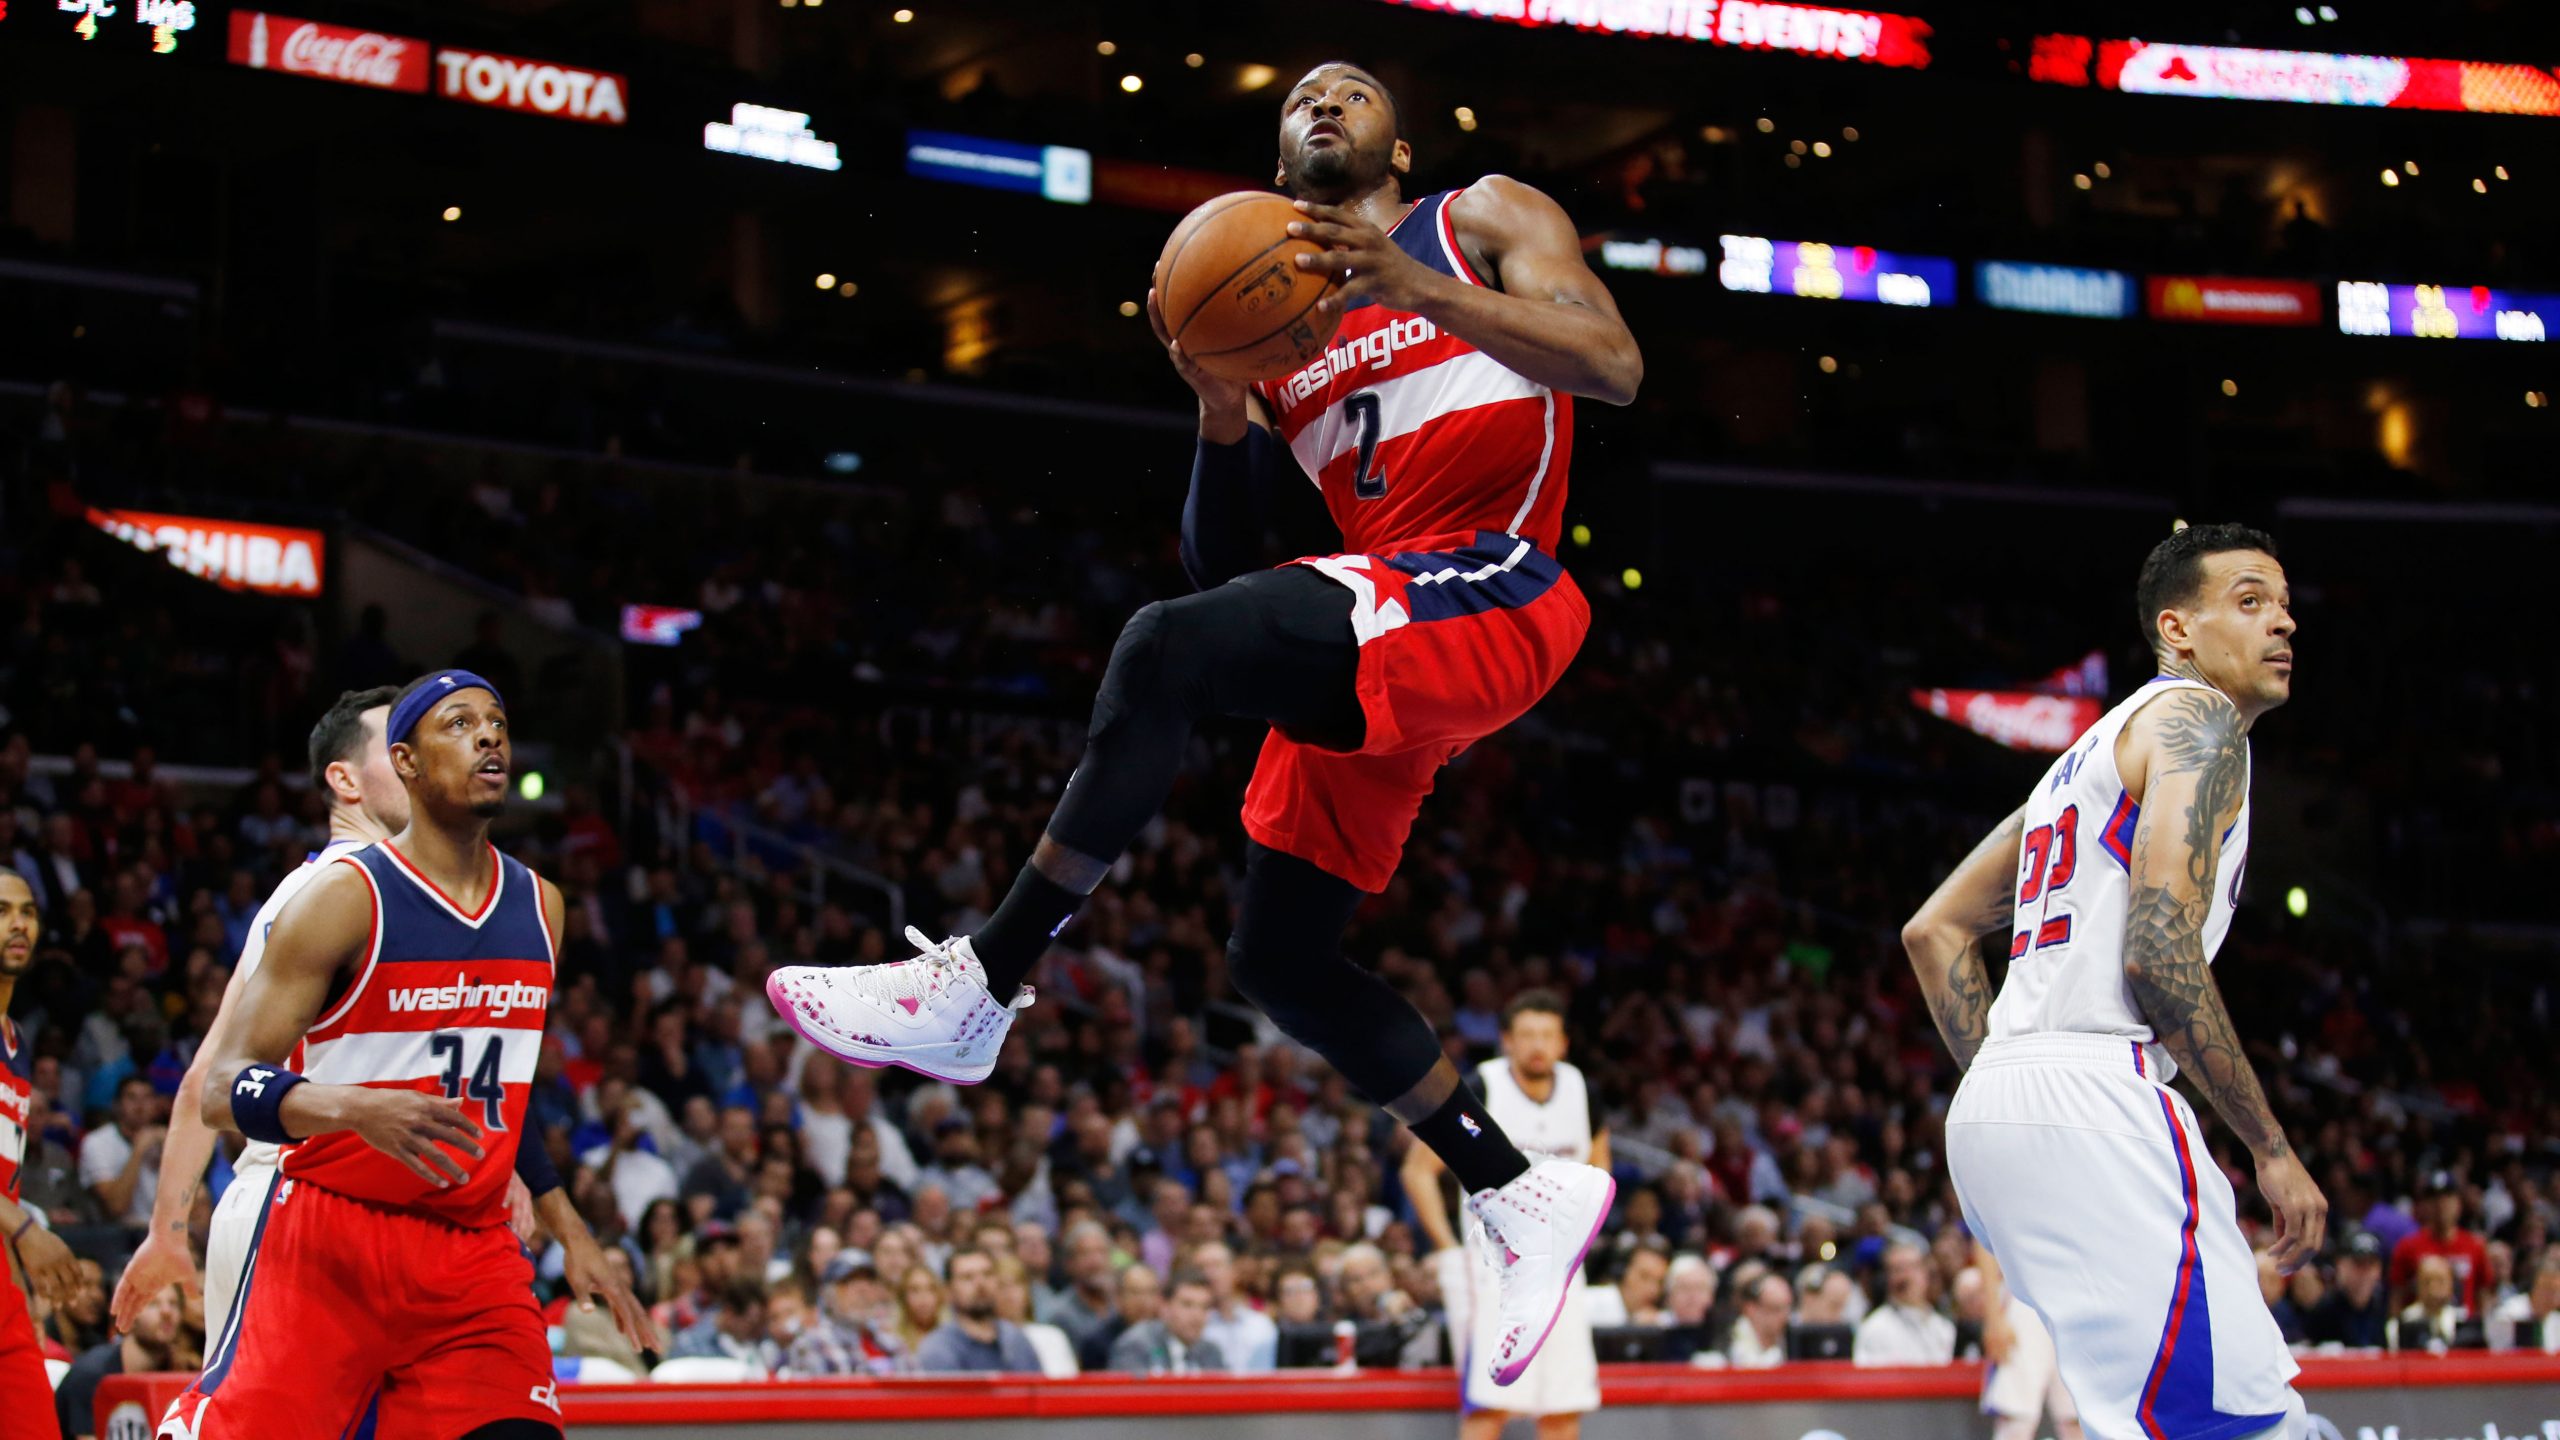 There's history behind John Wall's withering glare at Dennis Schroder - The  Washington Post